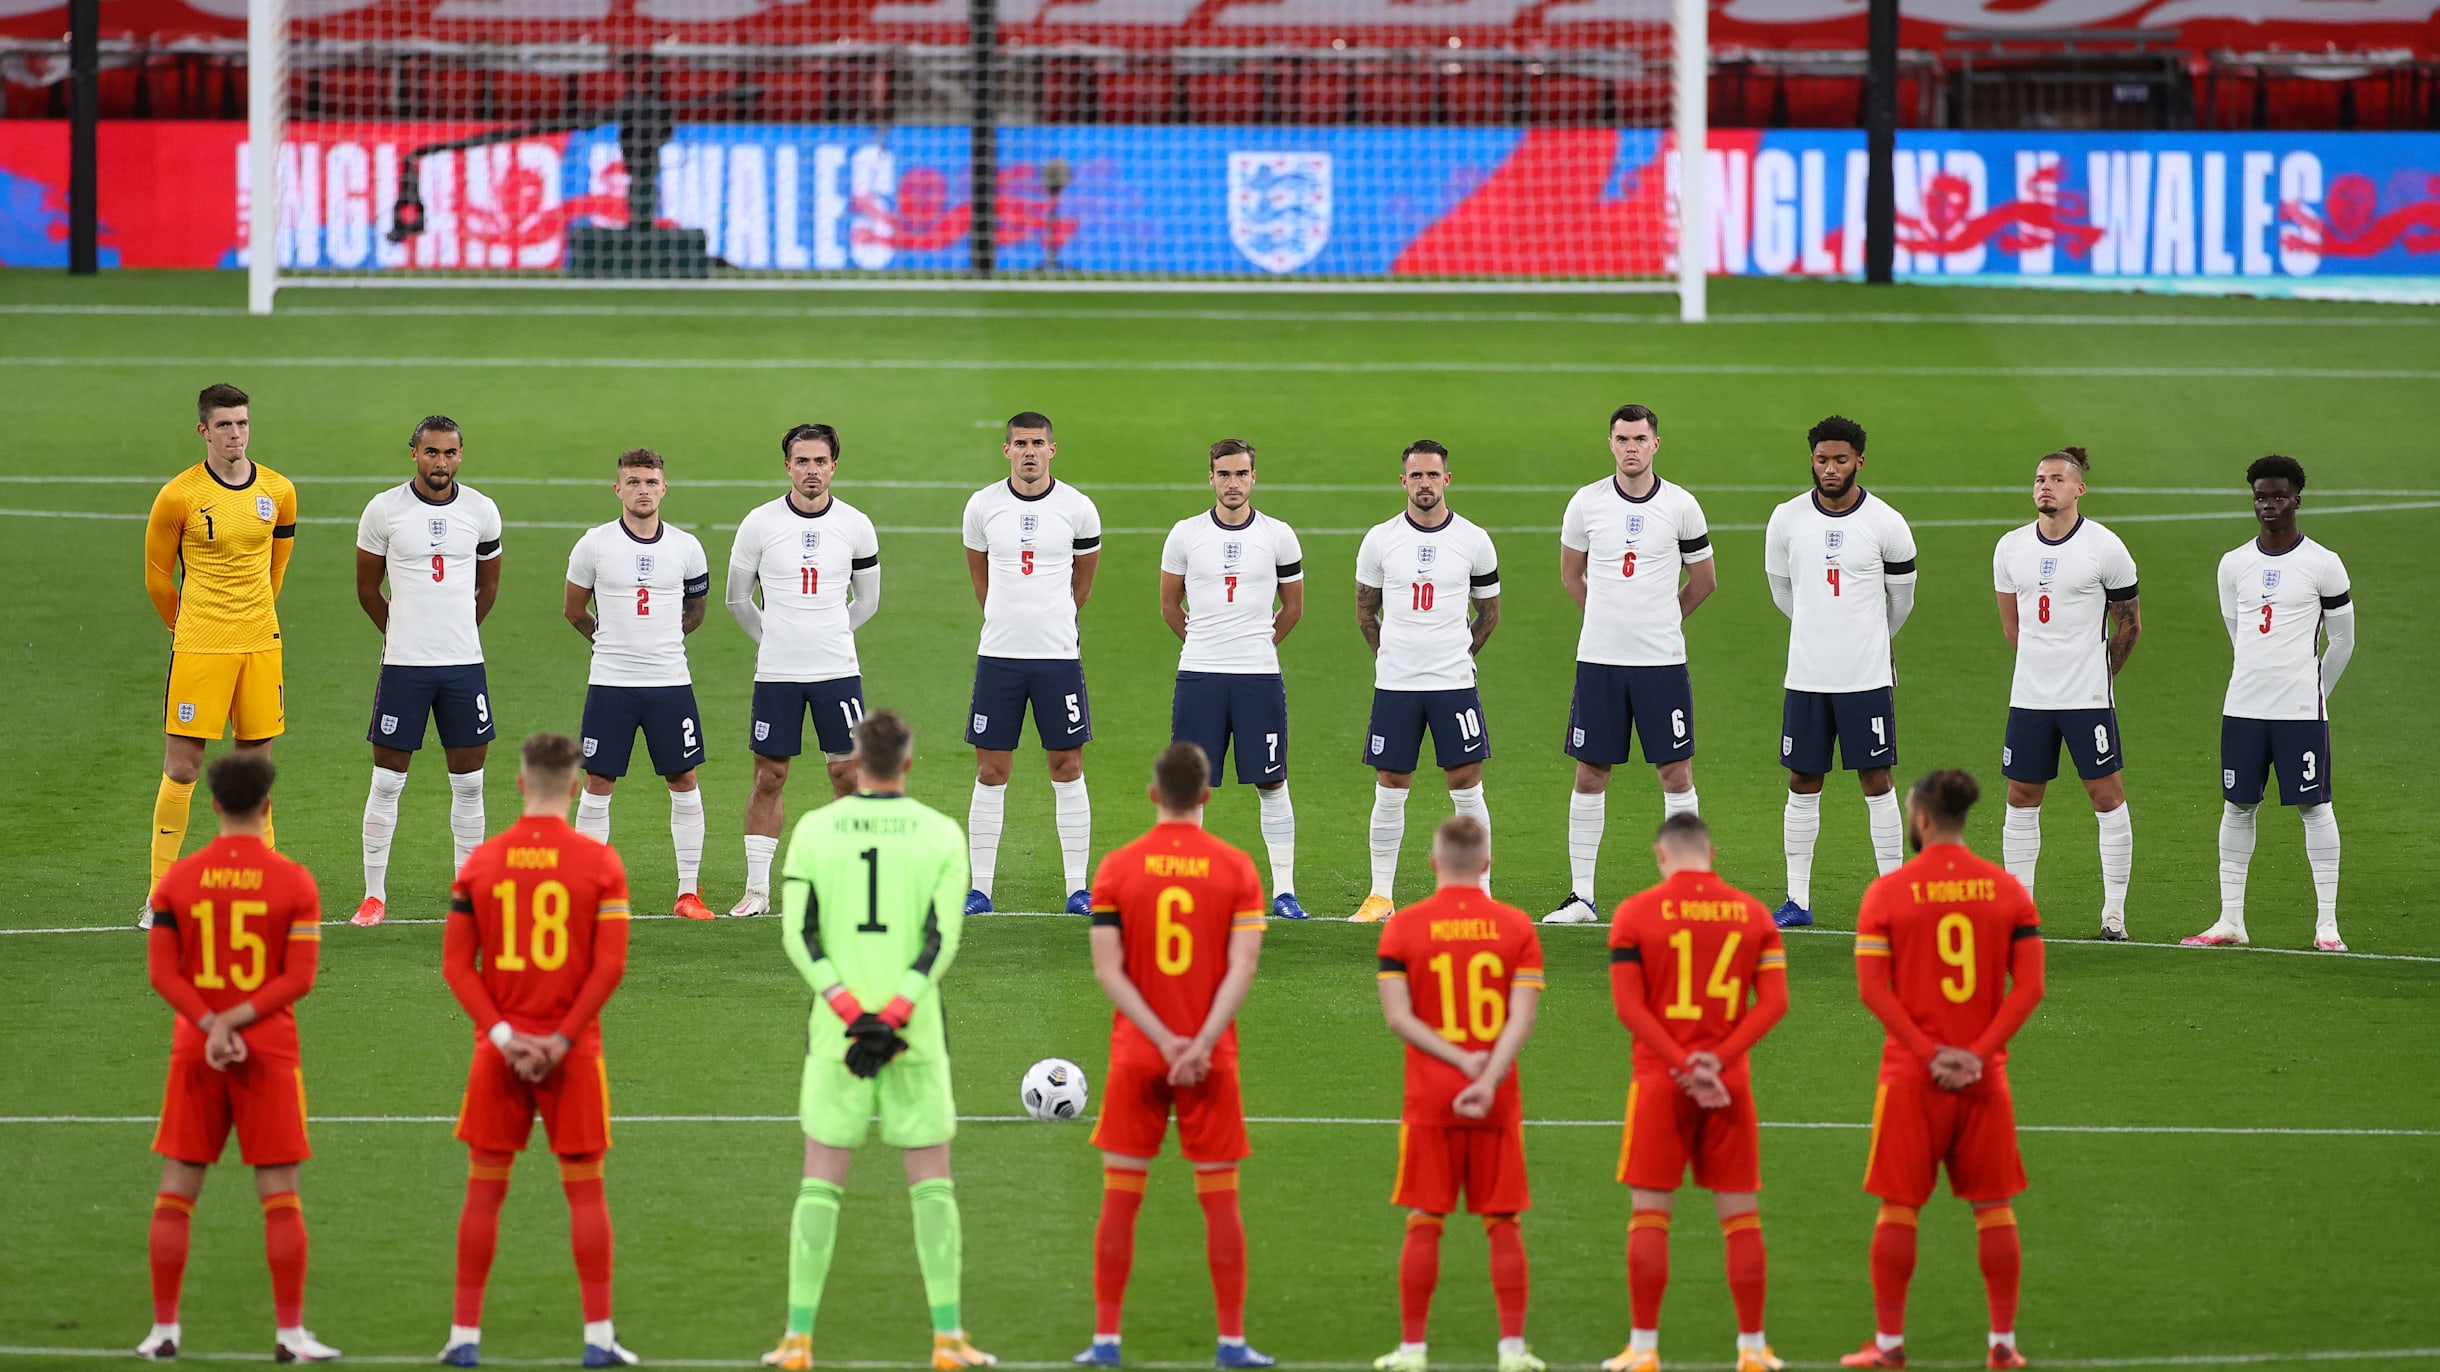 Wales v England at FIFA World Cup 2022 Find out head-to-head record, schedule and time